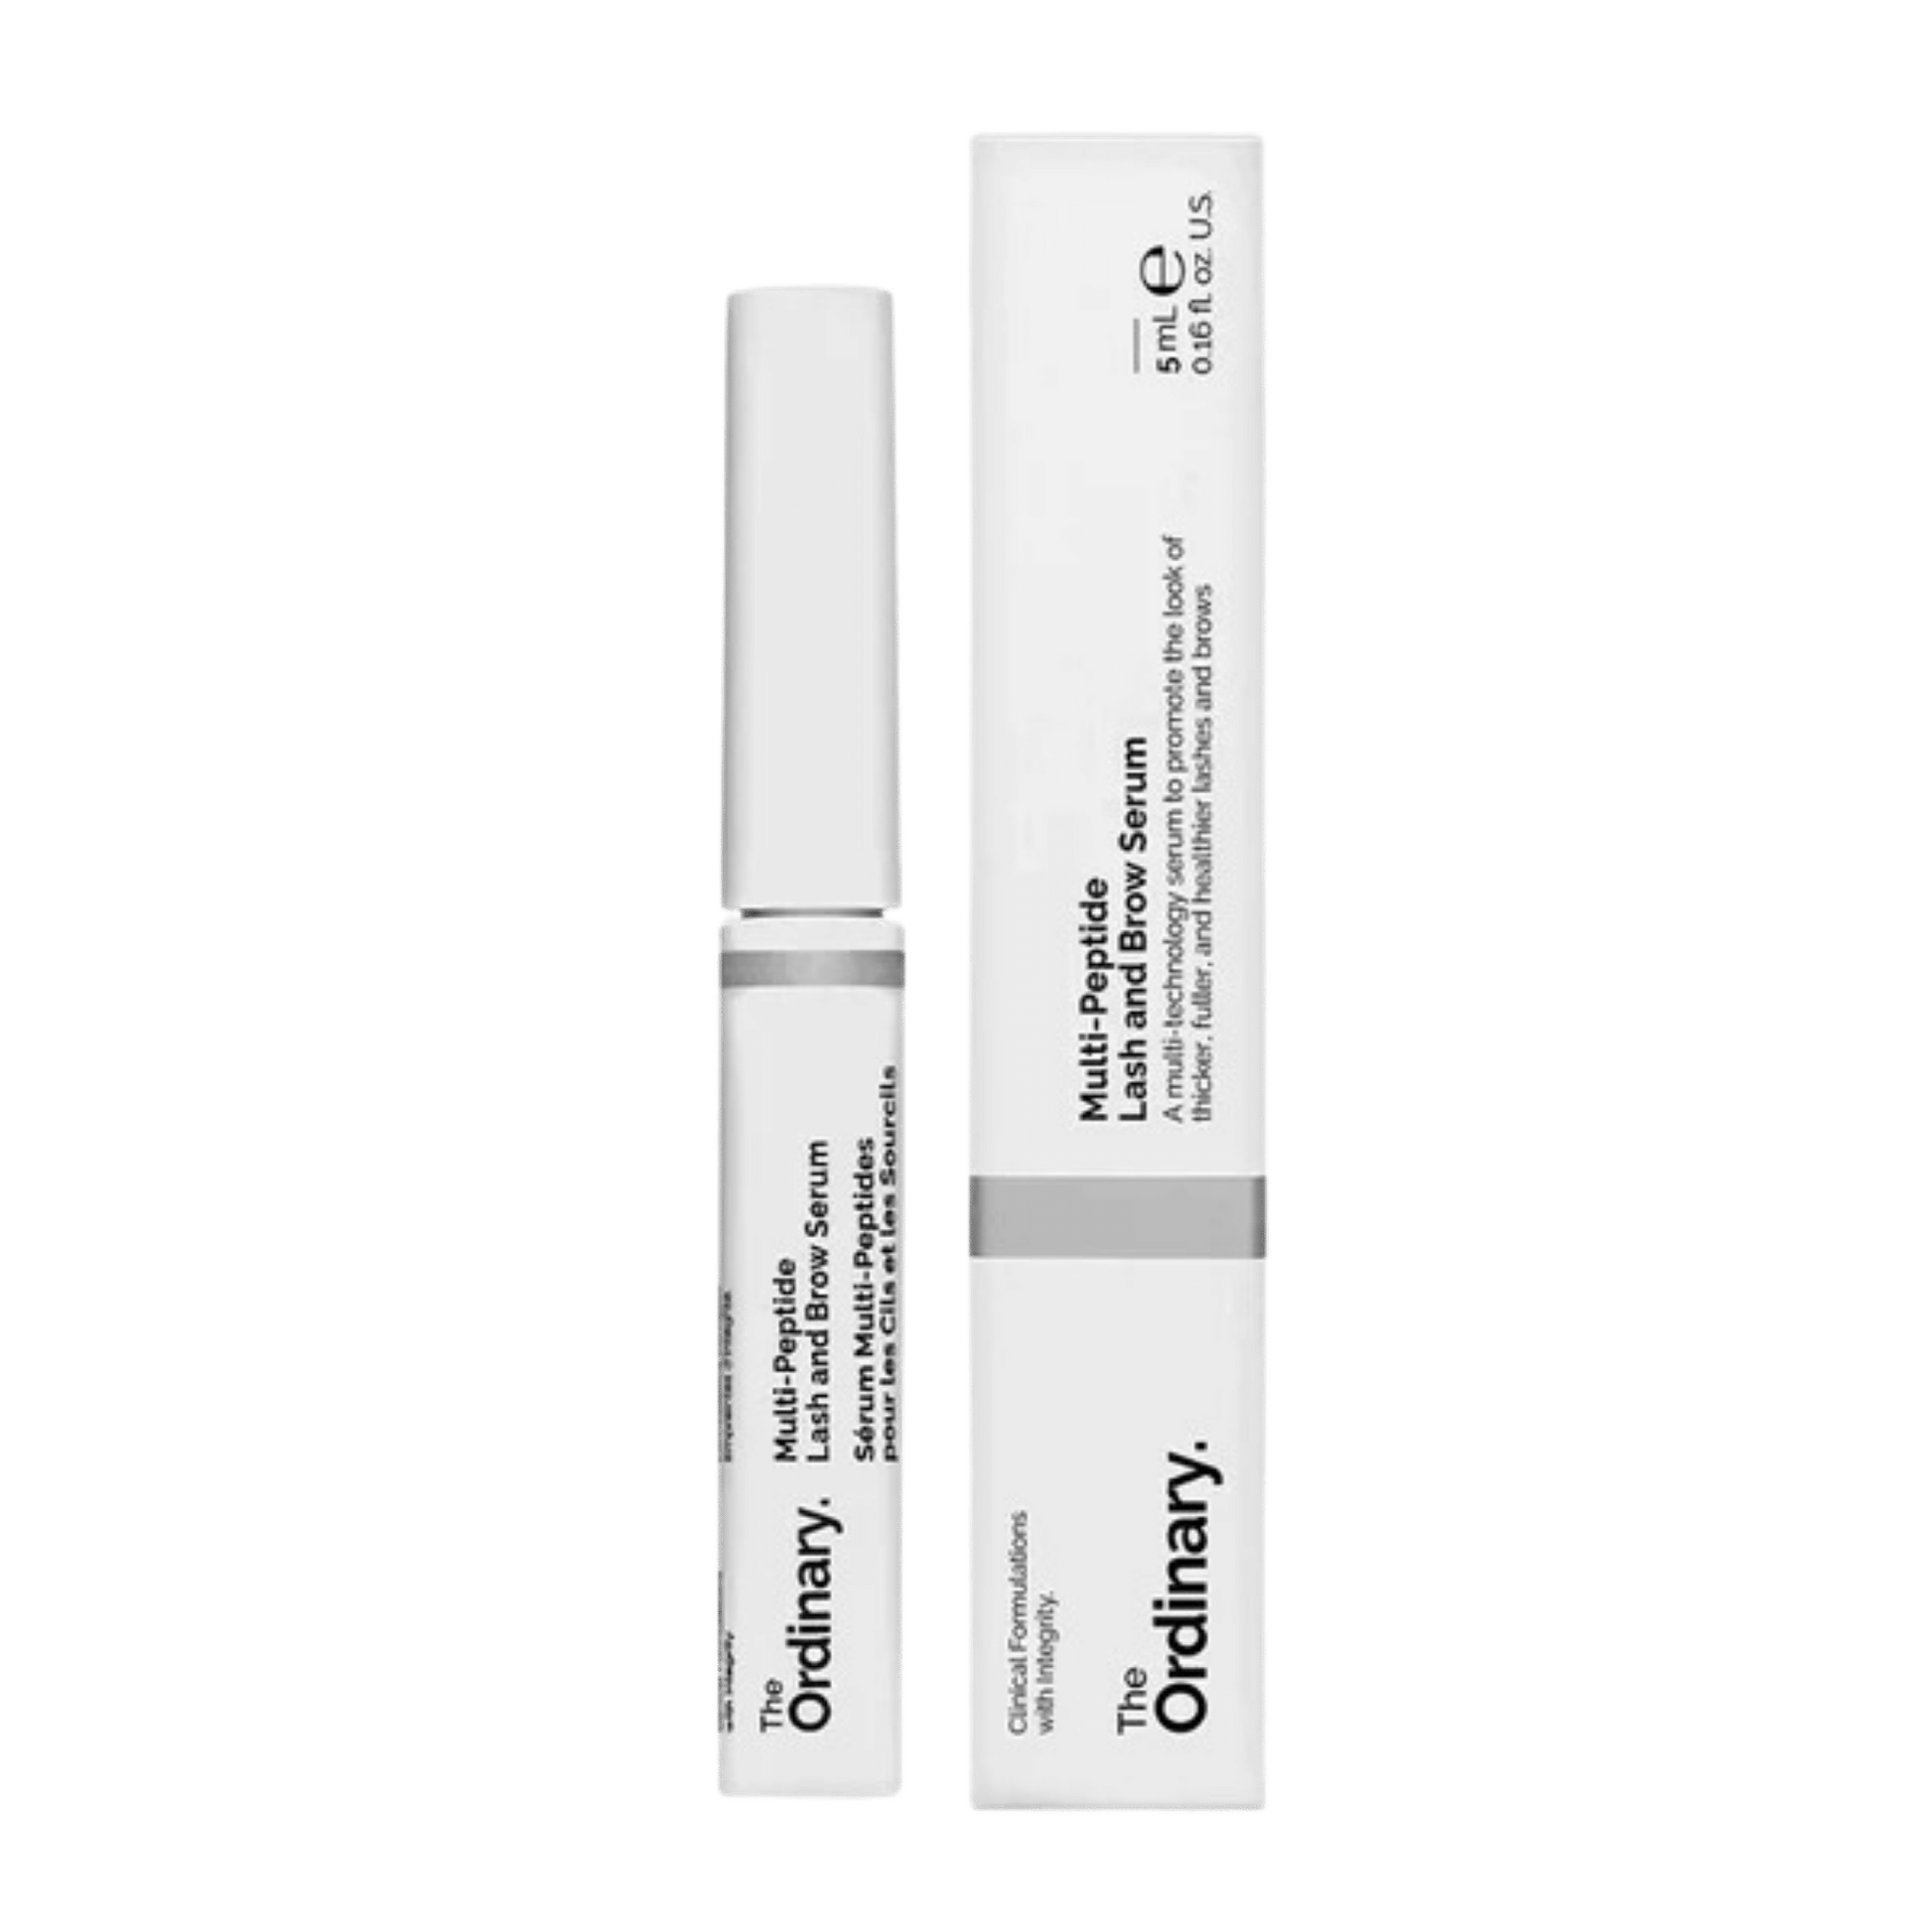 The Ordinary Multi-Peptide Lash And Brow Serum Is Now Available In Karachii!